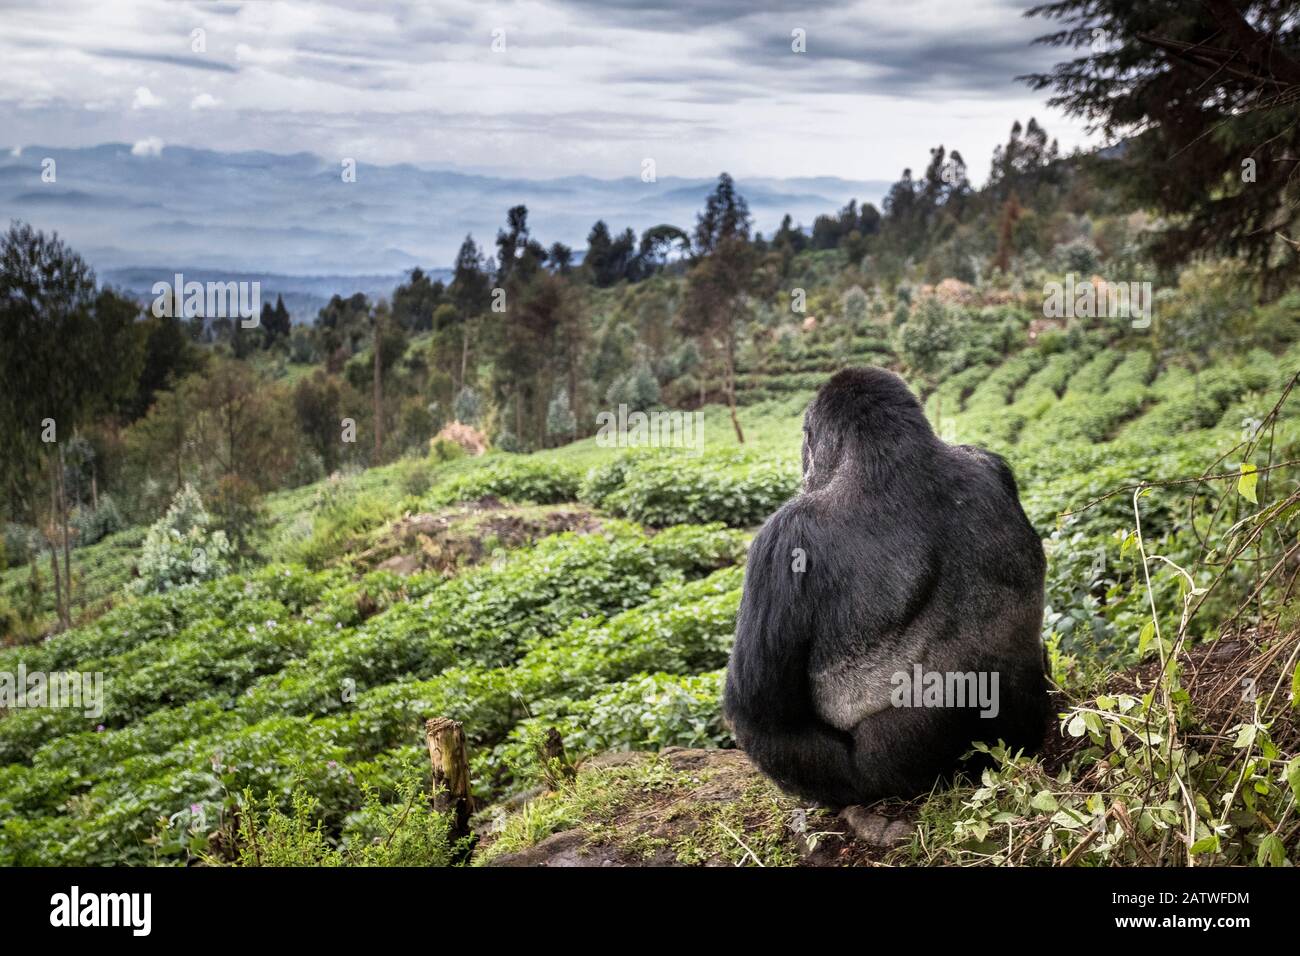 Mountain gorilla (Gorilla beringei beringei) silverback sitting on boundary wall between Volcanoes National Park and a Potato crop, looking into valley. Area to be restored to forest. Rwanda. Stock Photo